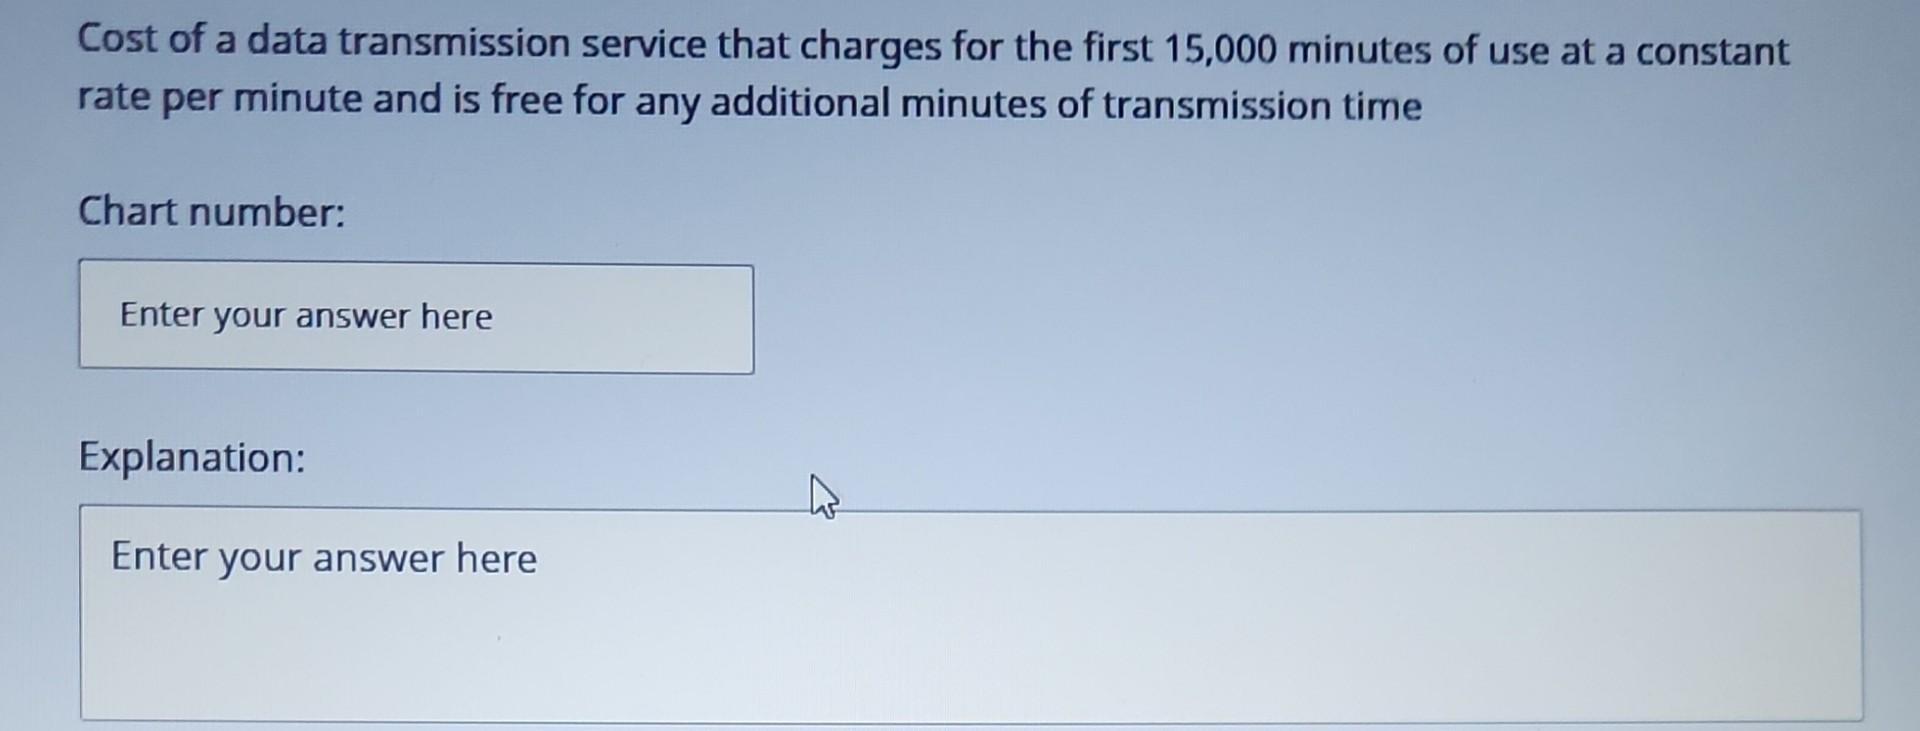 Cost of a data transmission service that charges for the first 15,000 minutes of use at a constant rate per minute and is fre